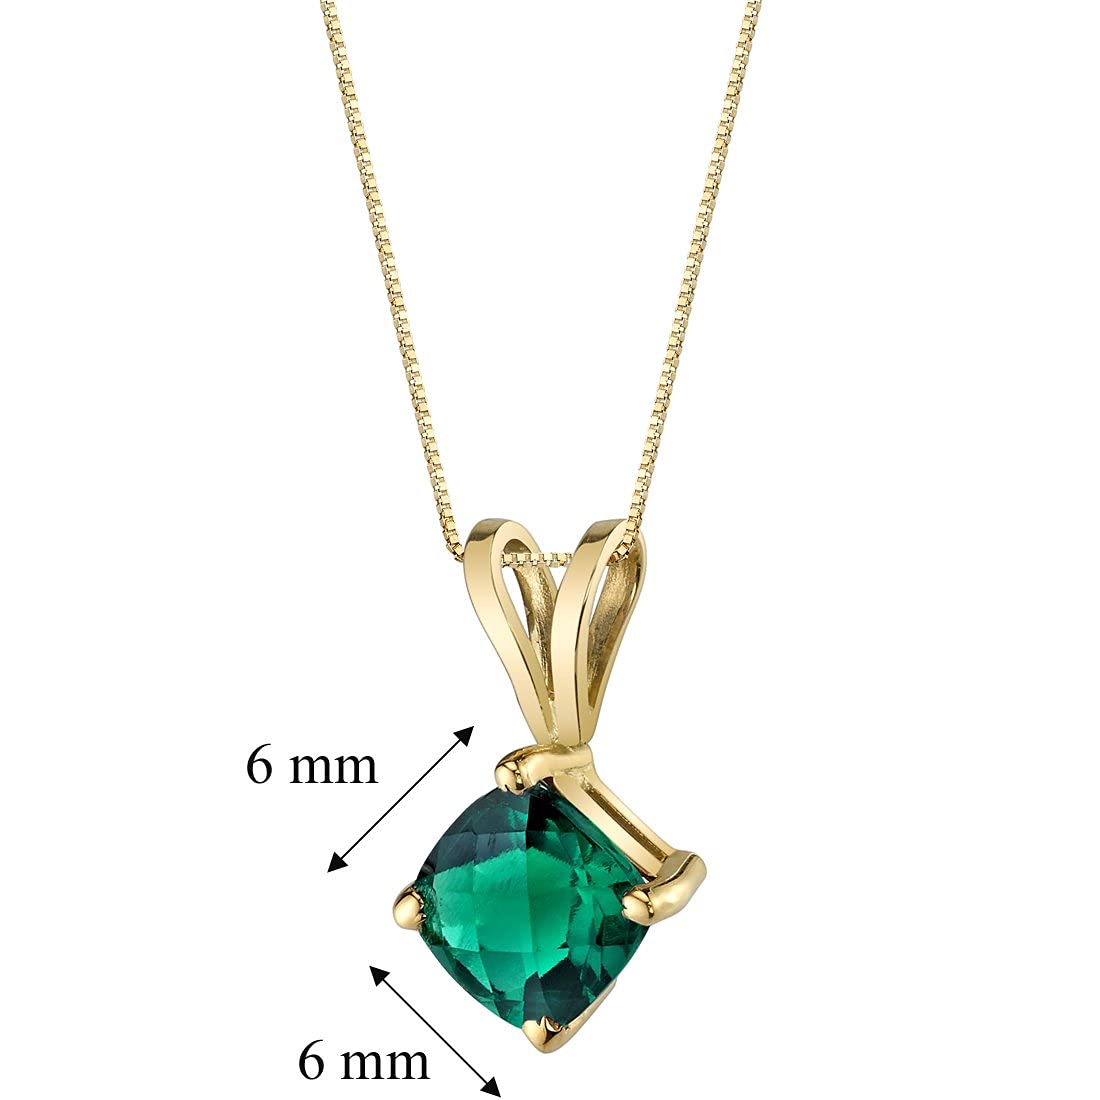 Peora Created Emerald Pendant for Women 14K Yellow Gold, Classic Solitaire, 0.75 Carat, Cushion Cut, 6mm, AAA Grade